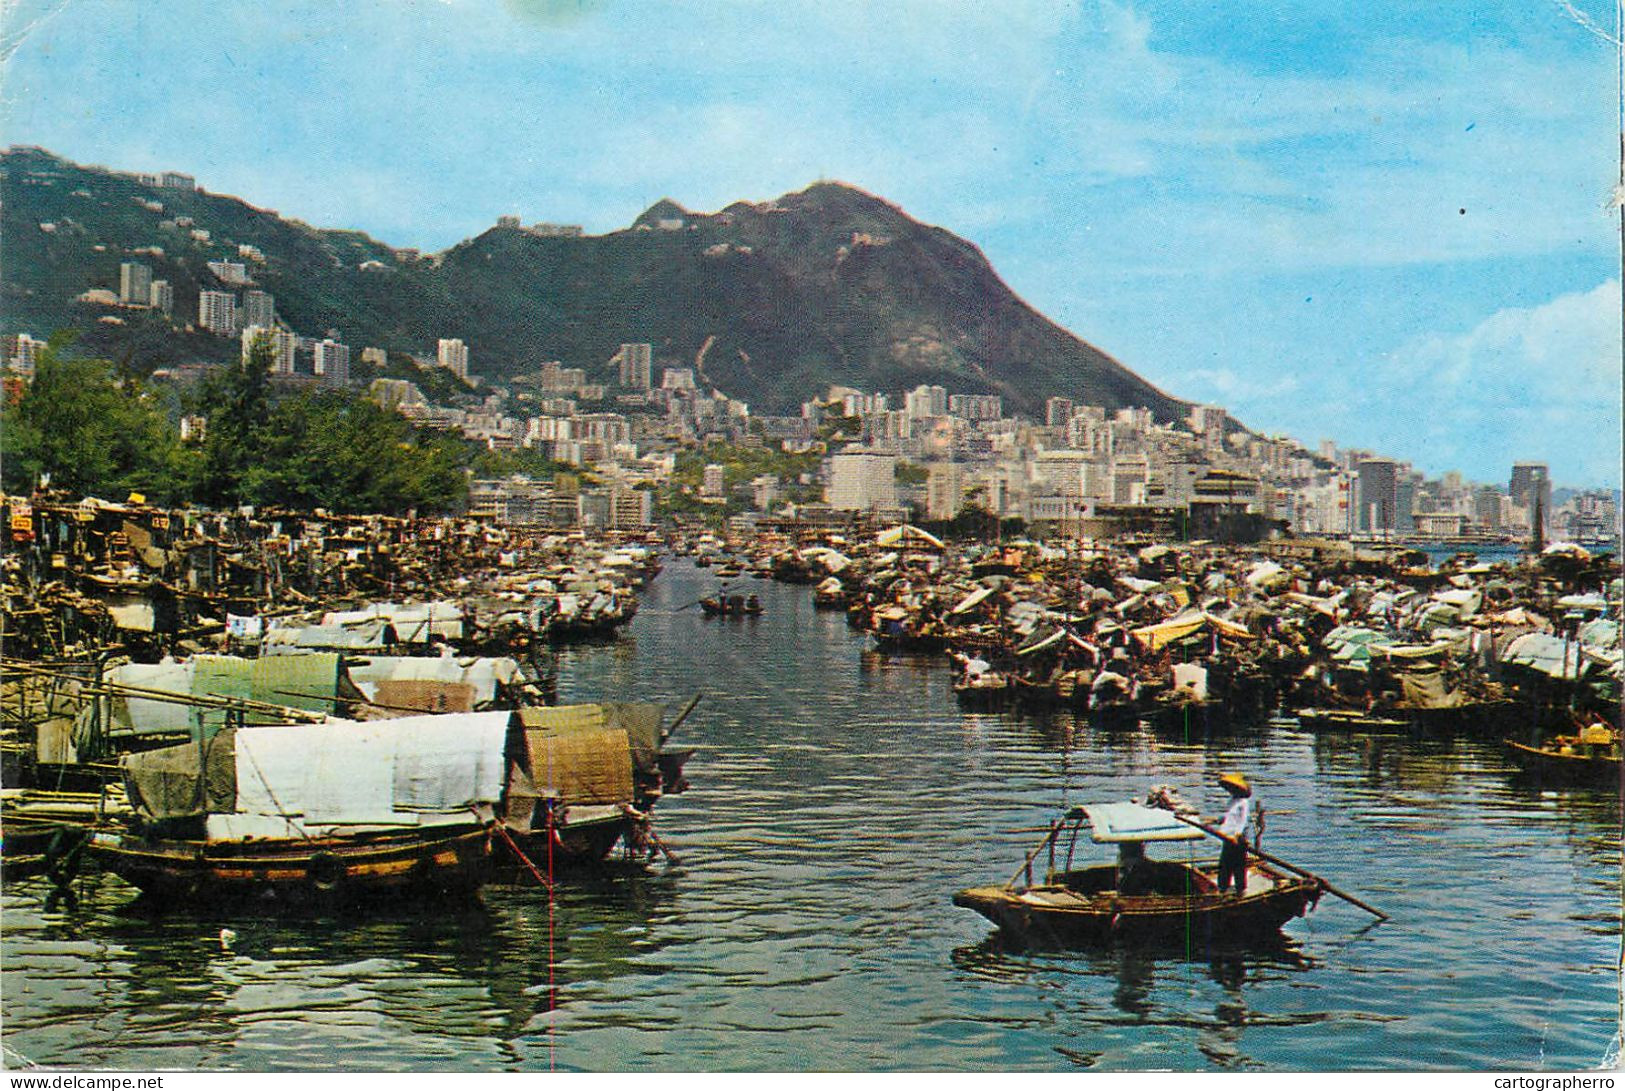 Navigation Sailing Vessels & Boats Themed Postcard Boat People In Causeway Bay Typhoon Shelter - Sailing Vessels